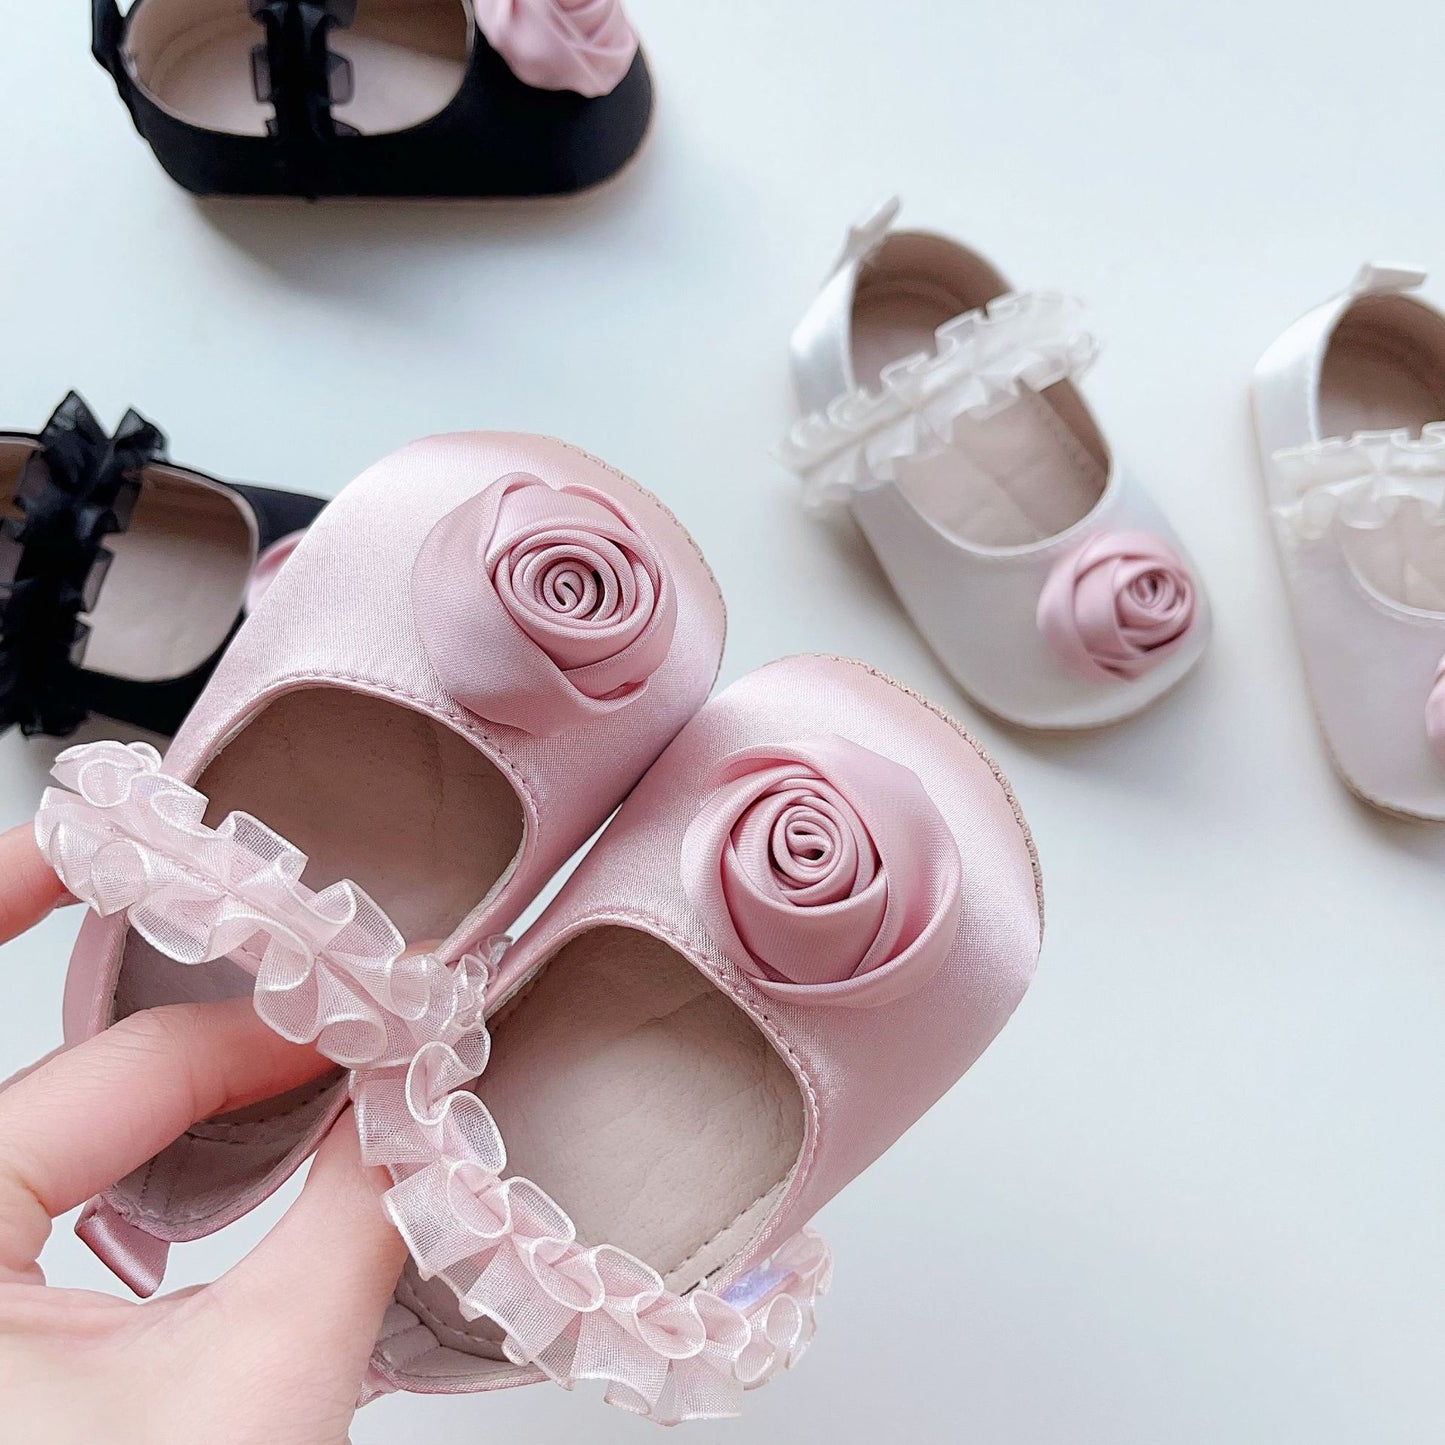 New Arrival Baby Girl 3D Flower Ruffle Lace Toddler Soft-Sole Anti-Slip Walking Shoes